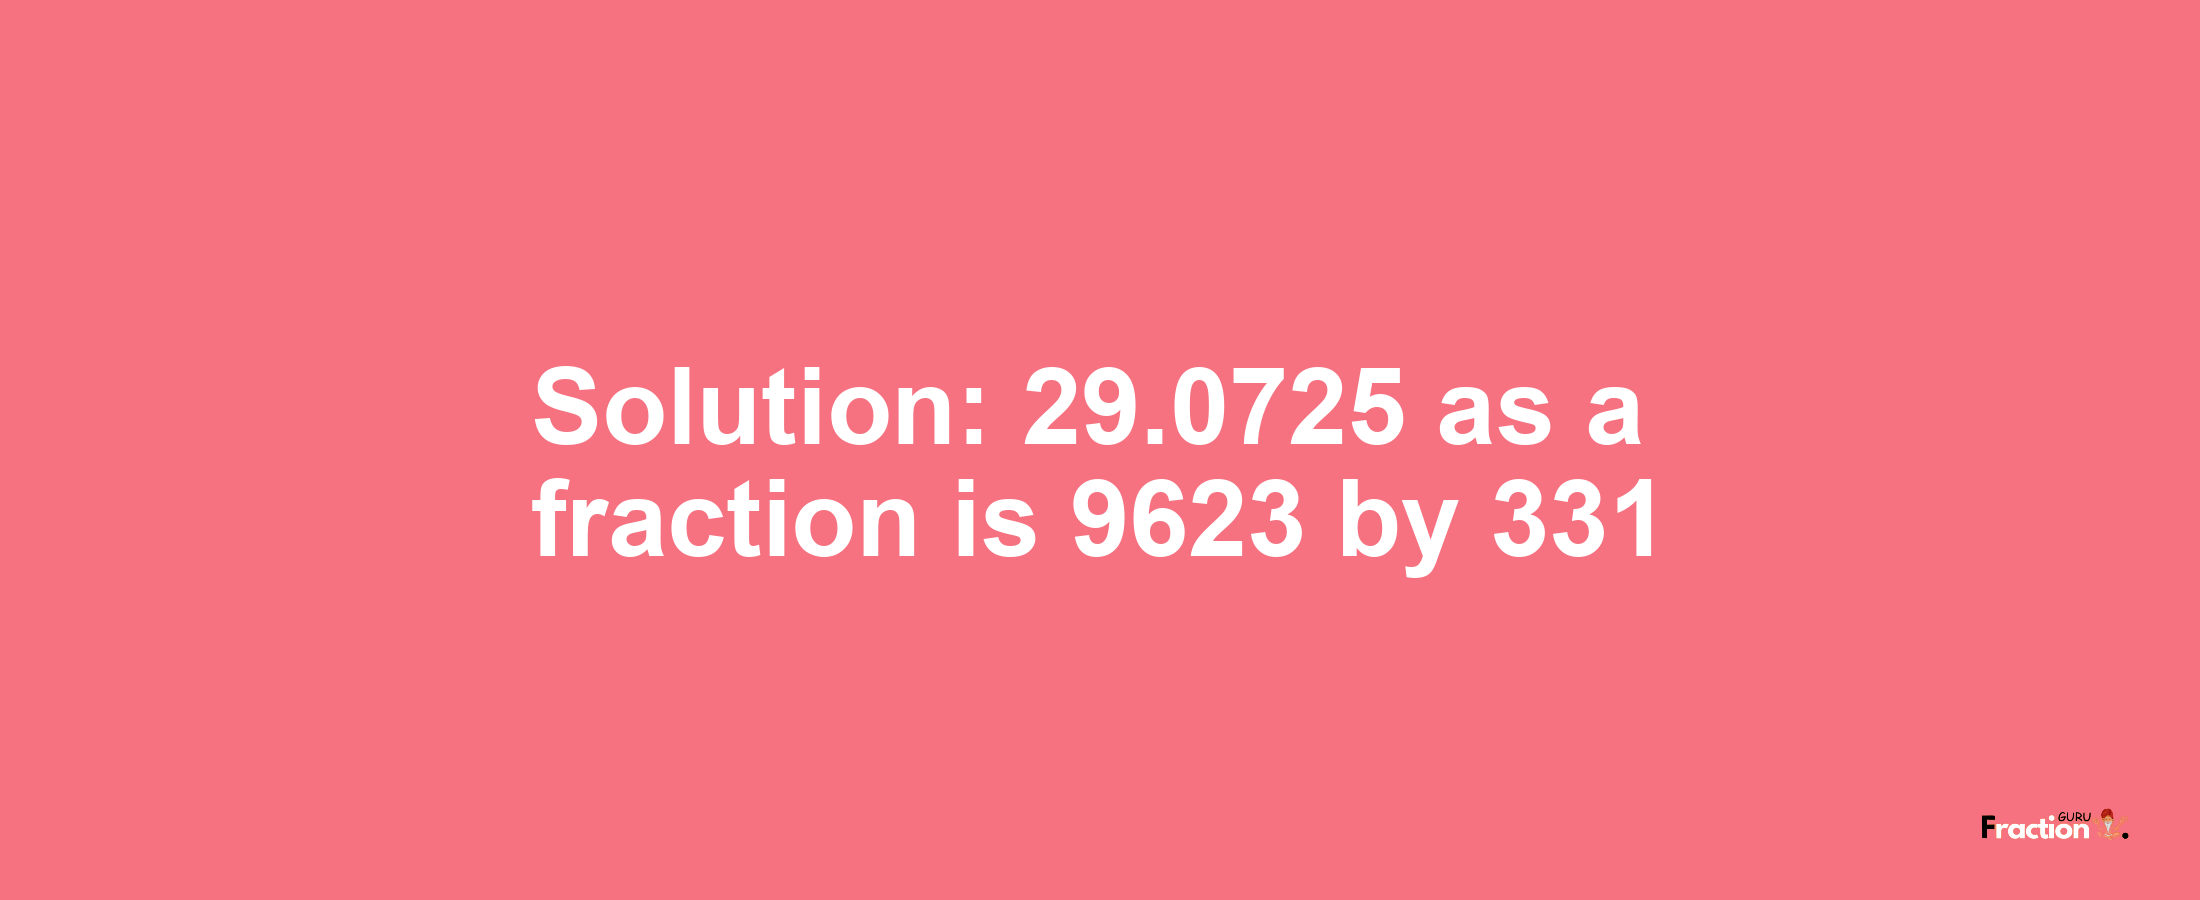 Solution:29.0725 as a fraction is 9623/331